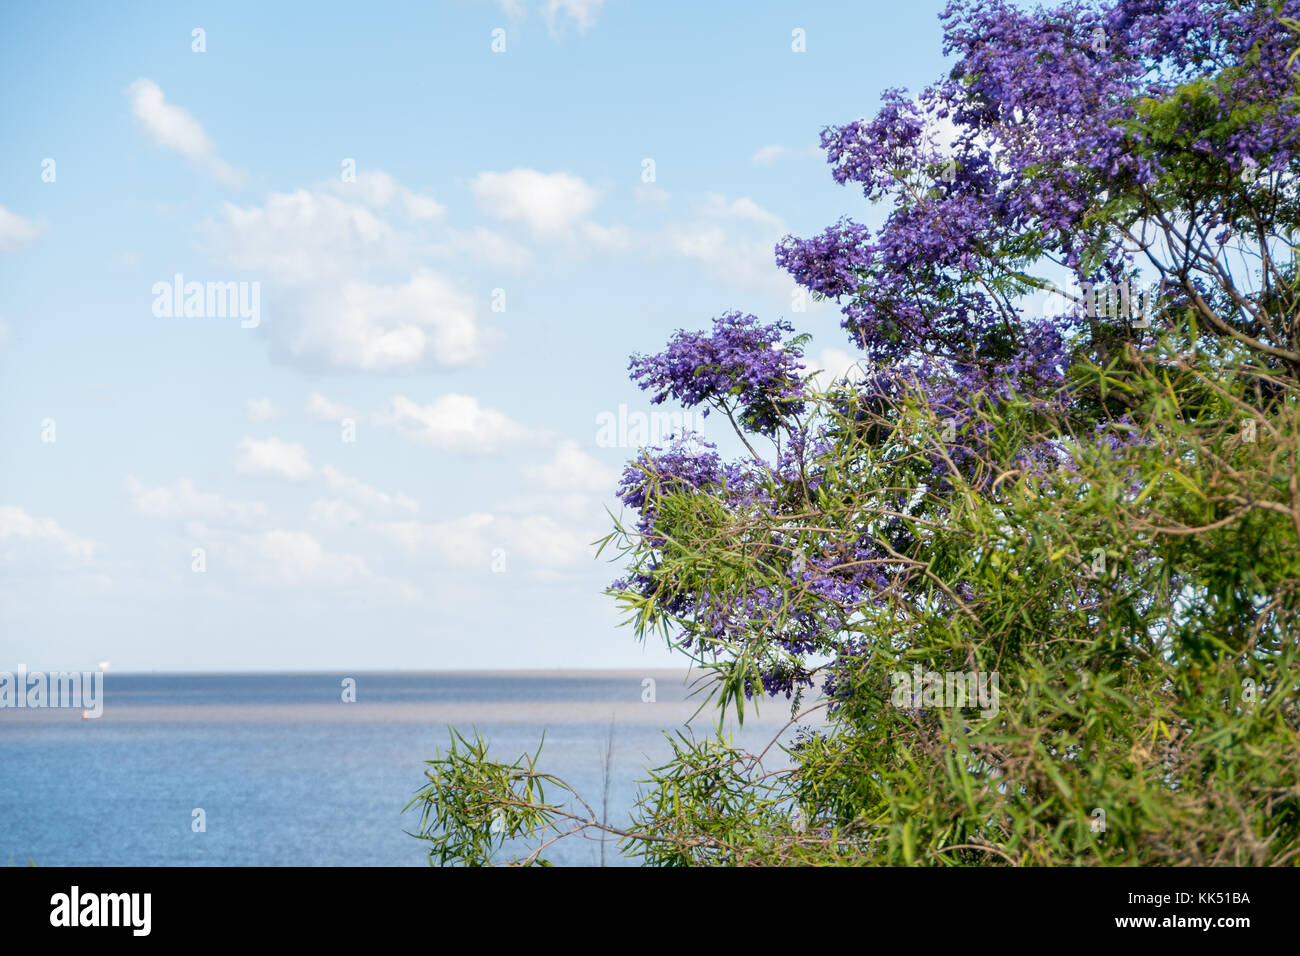 Beautiful blue sky with white clouds and Rio de La Plata horizon with vegetation in the foreground. Stock Photo